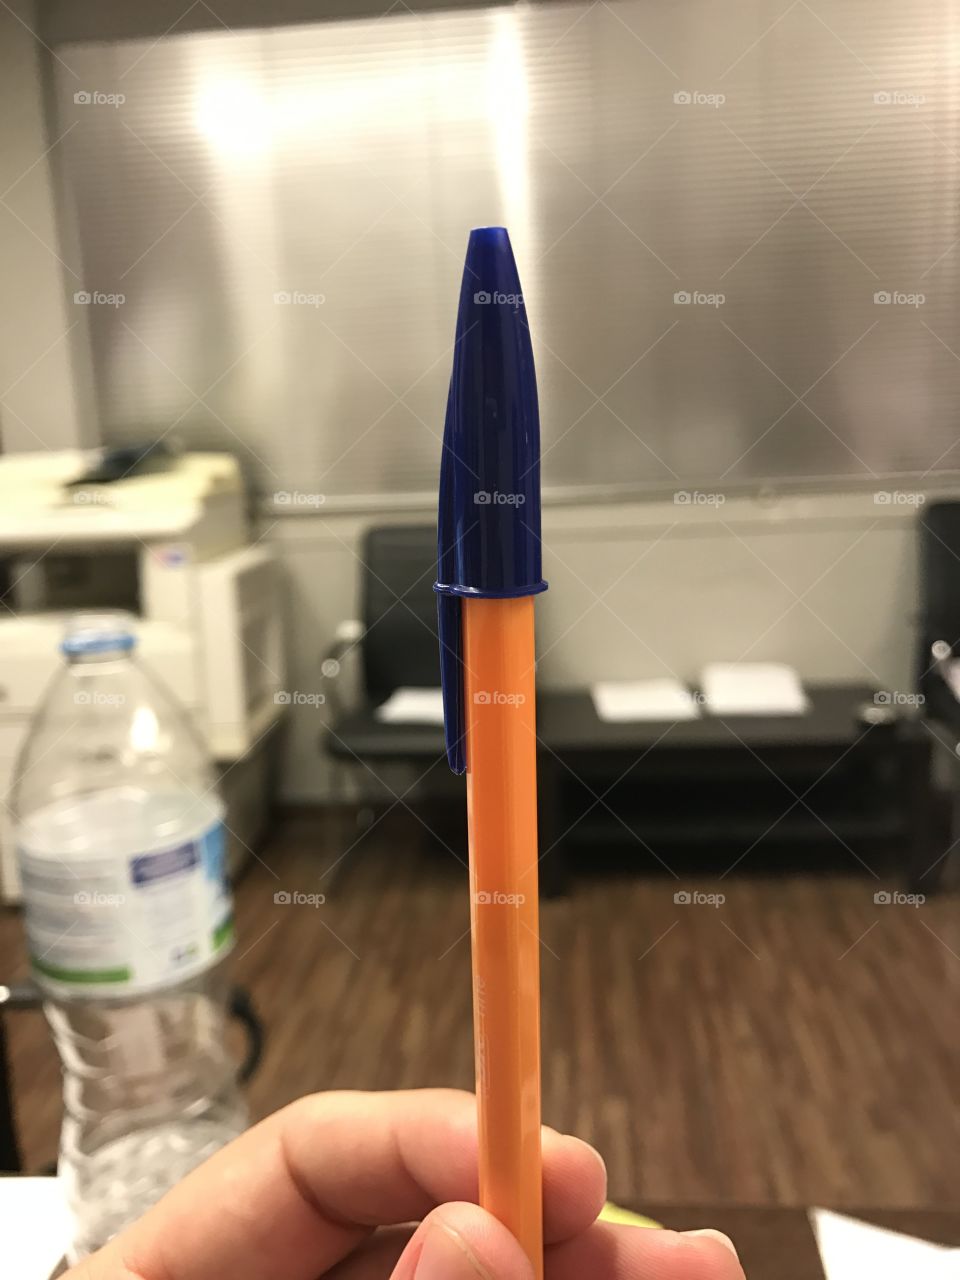 Just a pen at the office